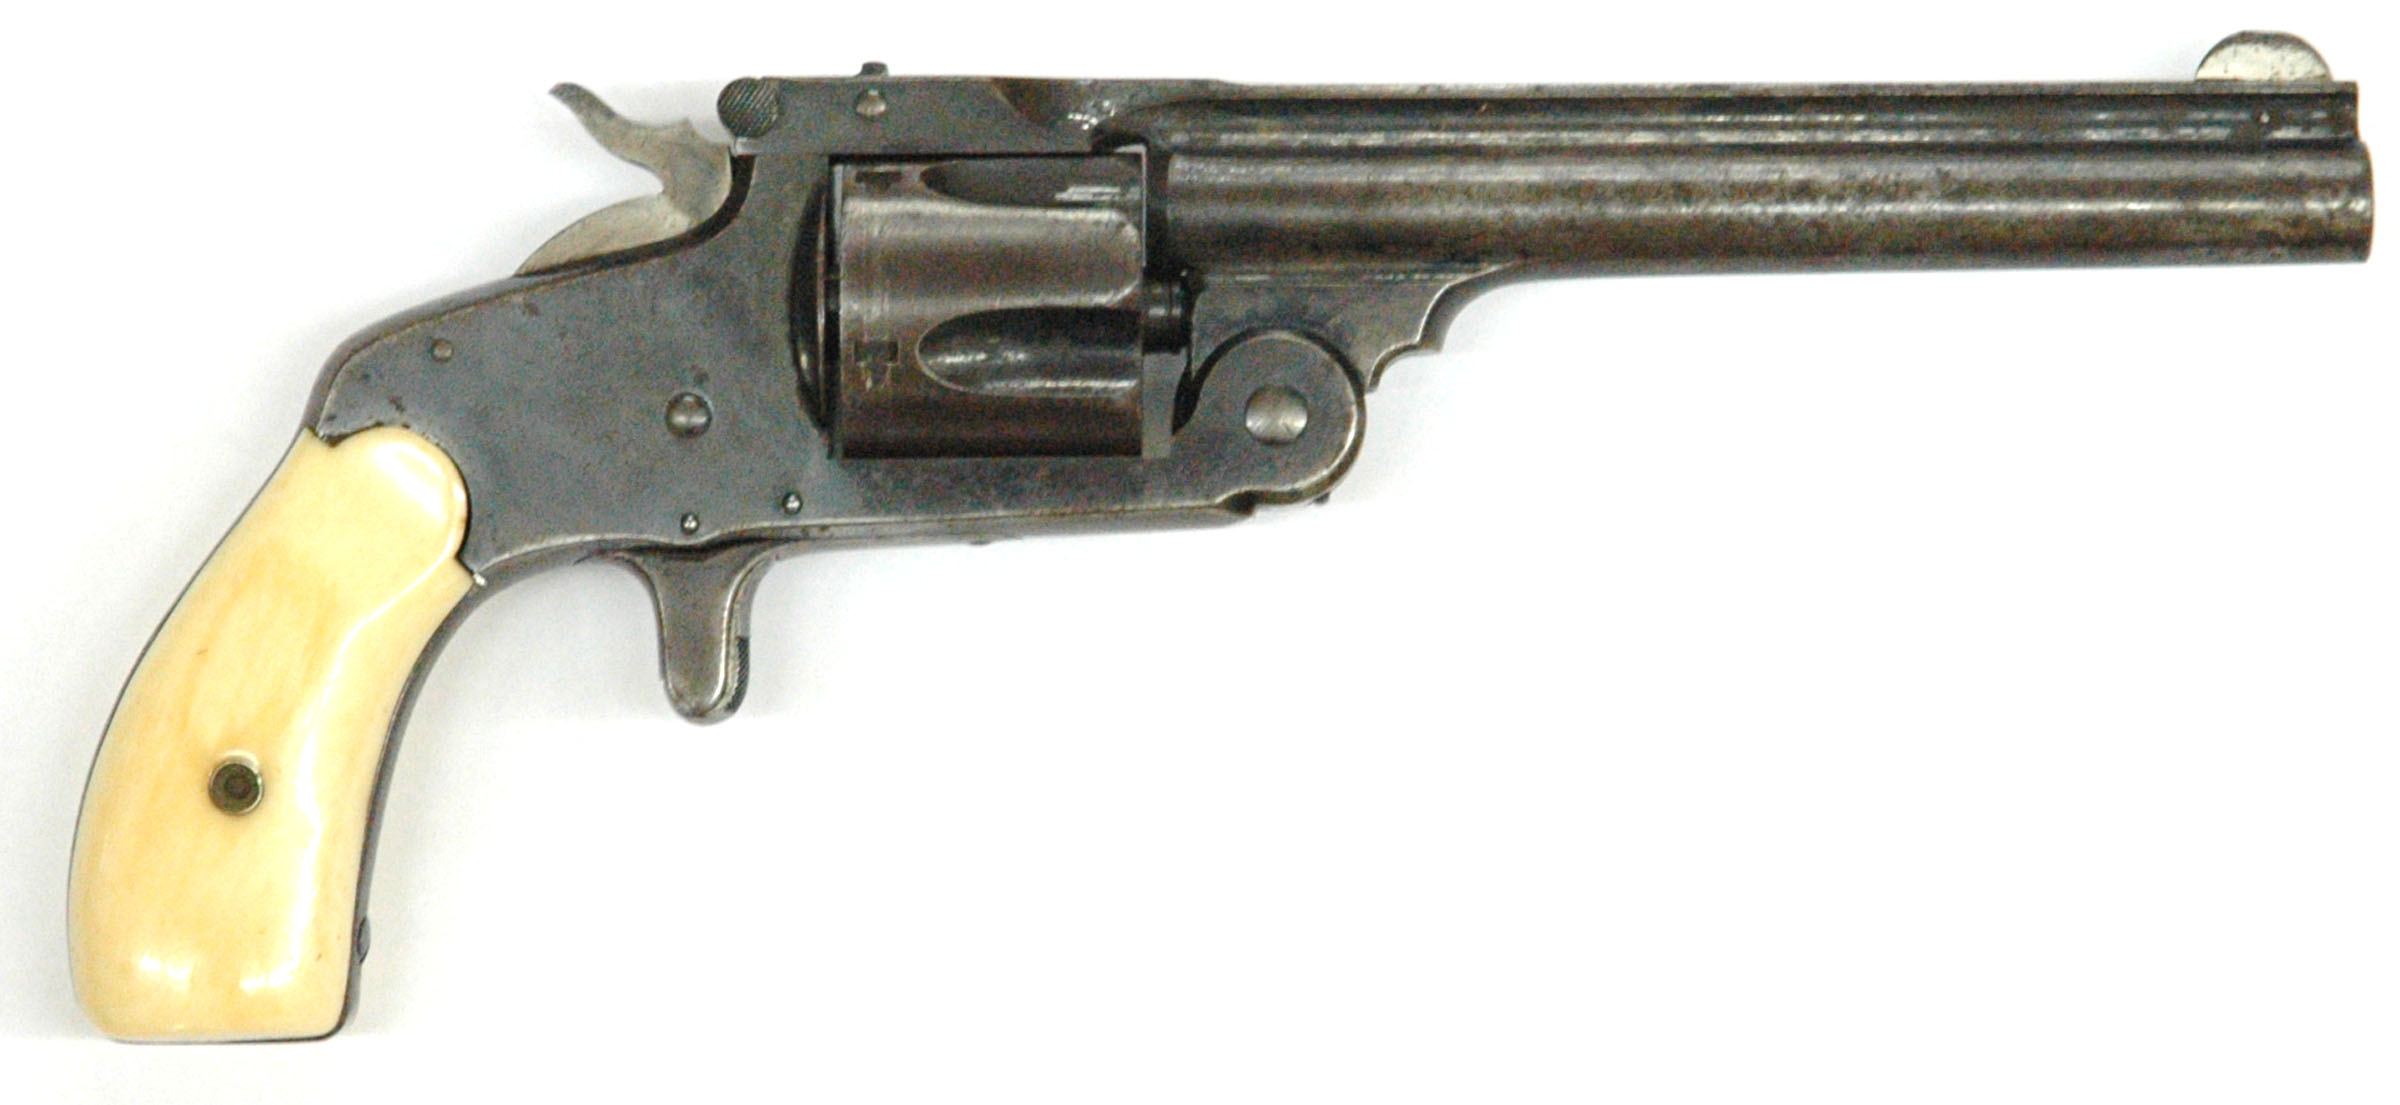 18522 SMITH & WESSON .38 SINGLE ACTION MEXICAN MODEL REVOLVER